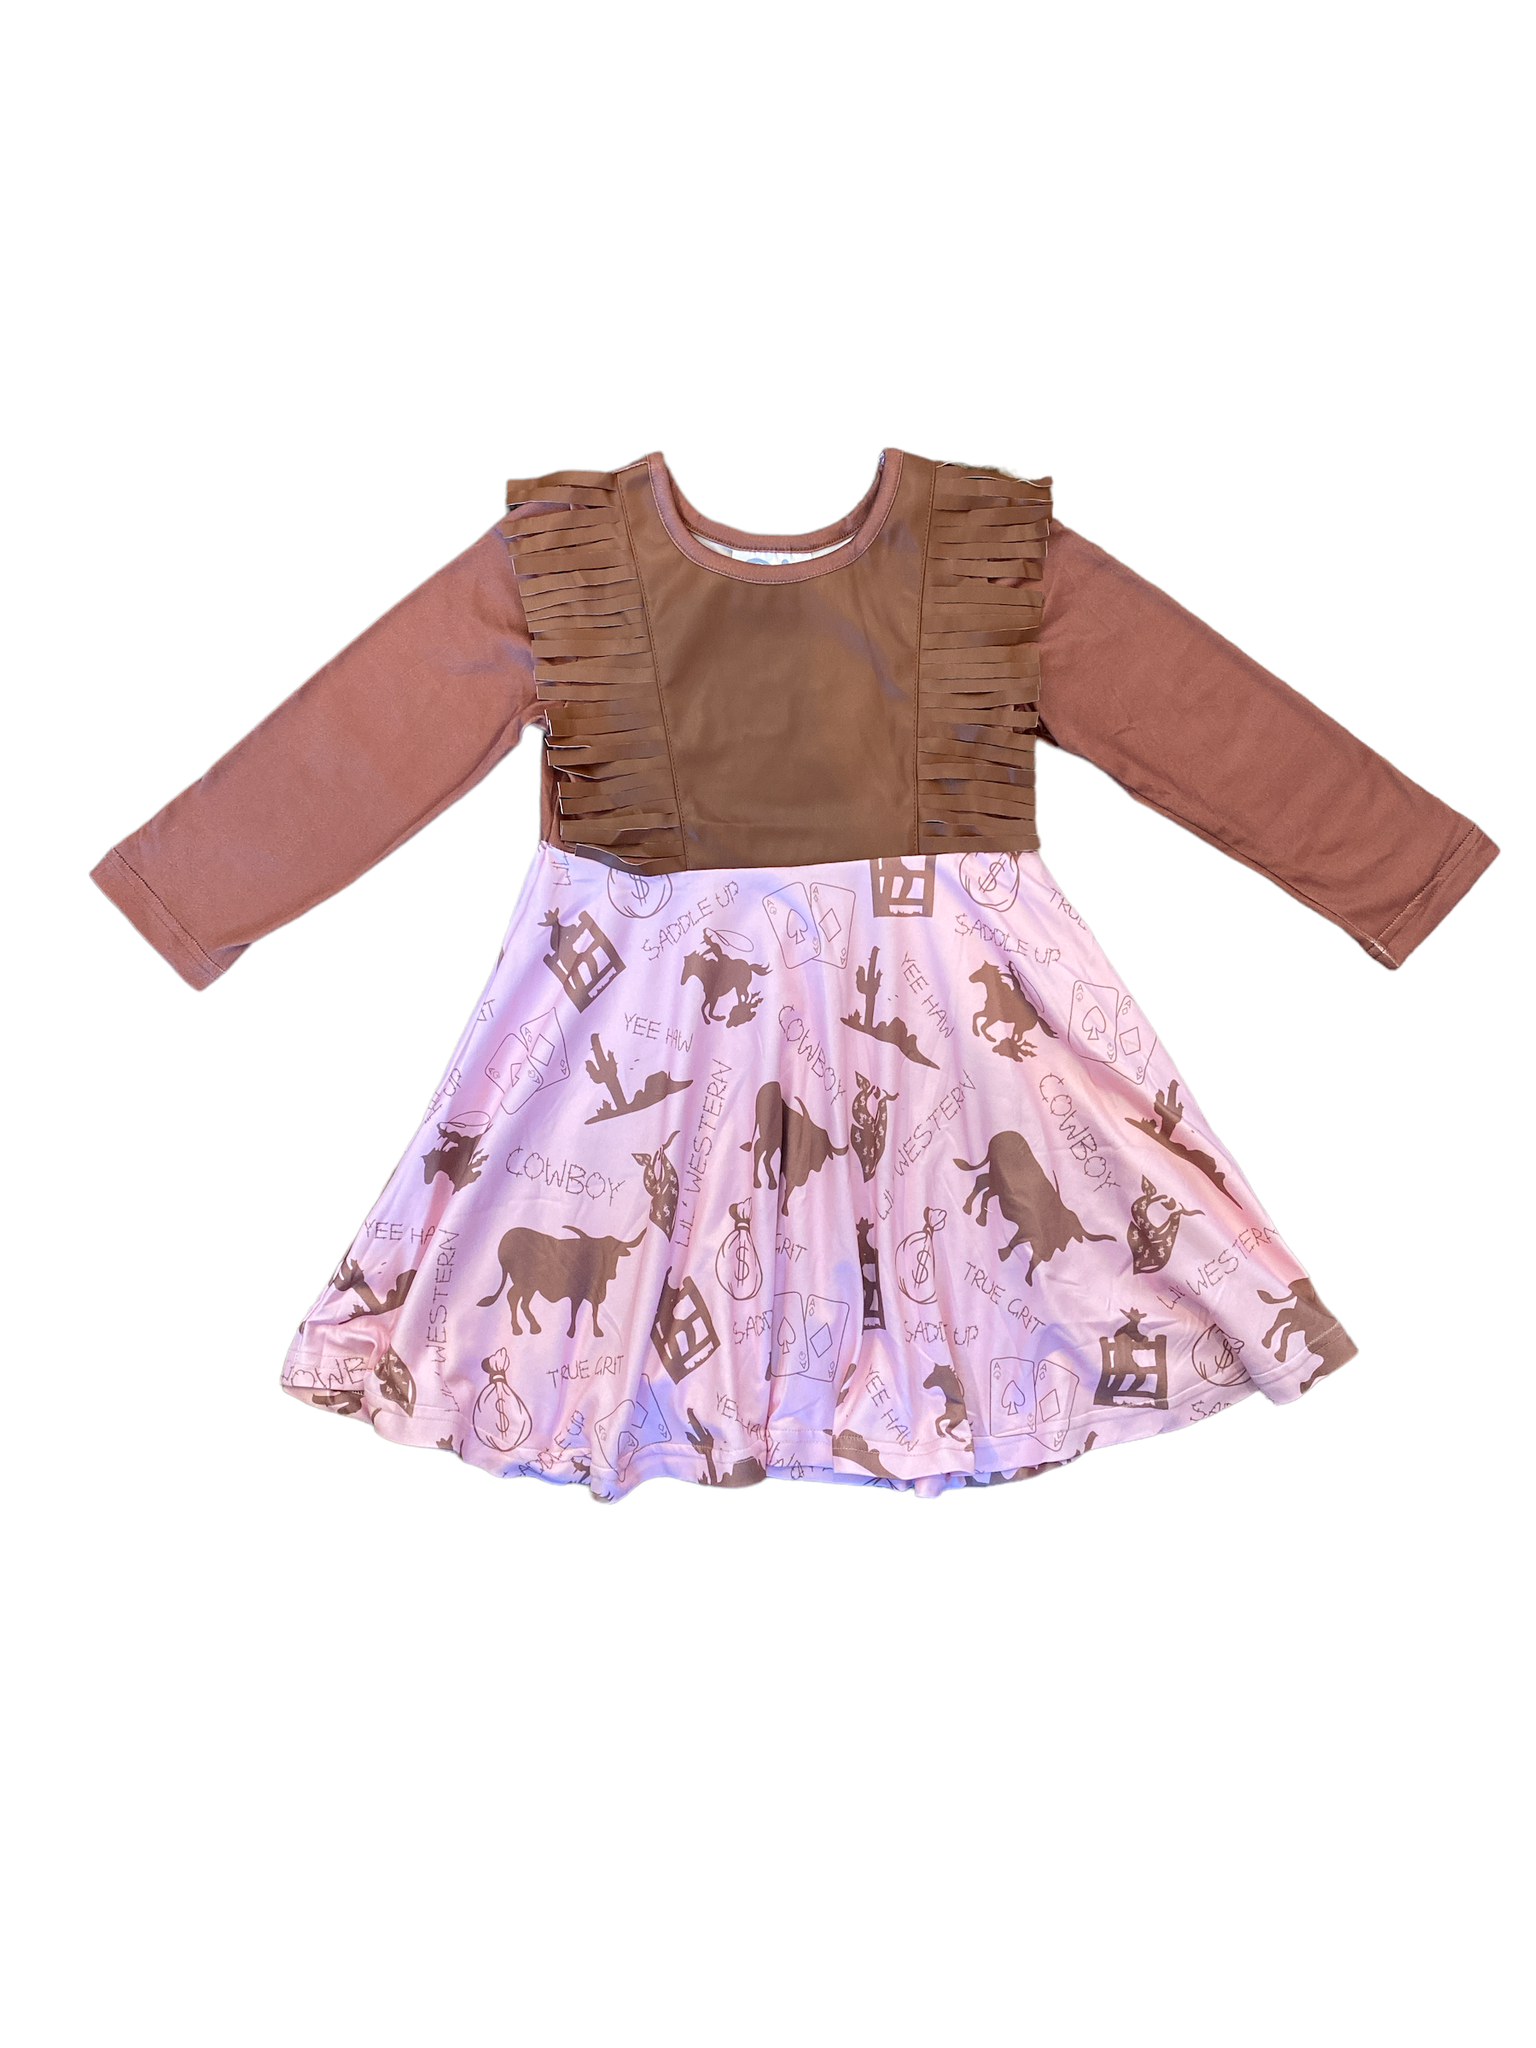 Eliza Cate and Co Girl's Cowboy BFF Fairytale Twirl Dress – Baby Riddle